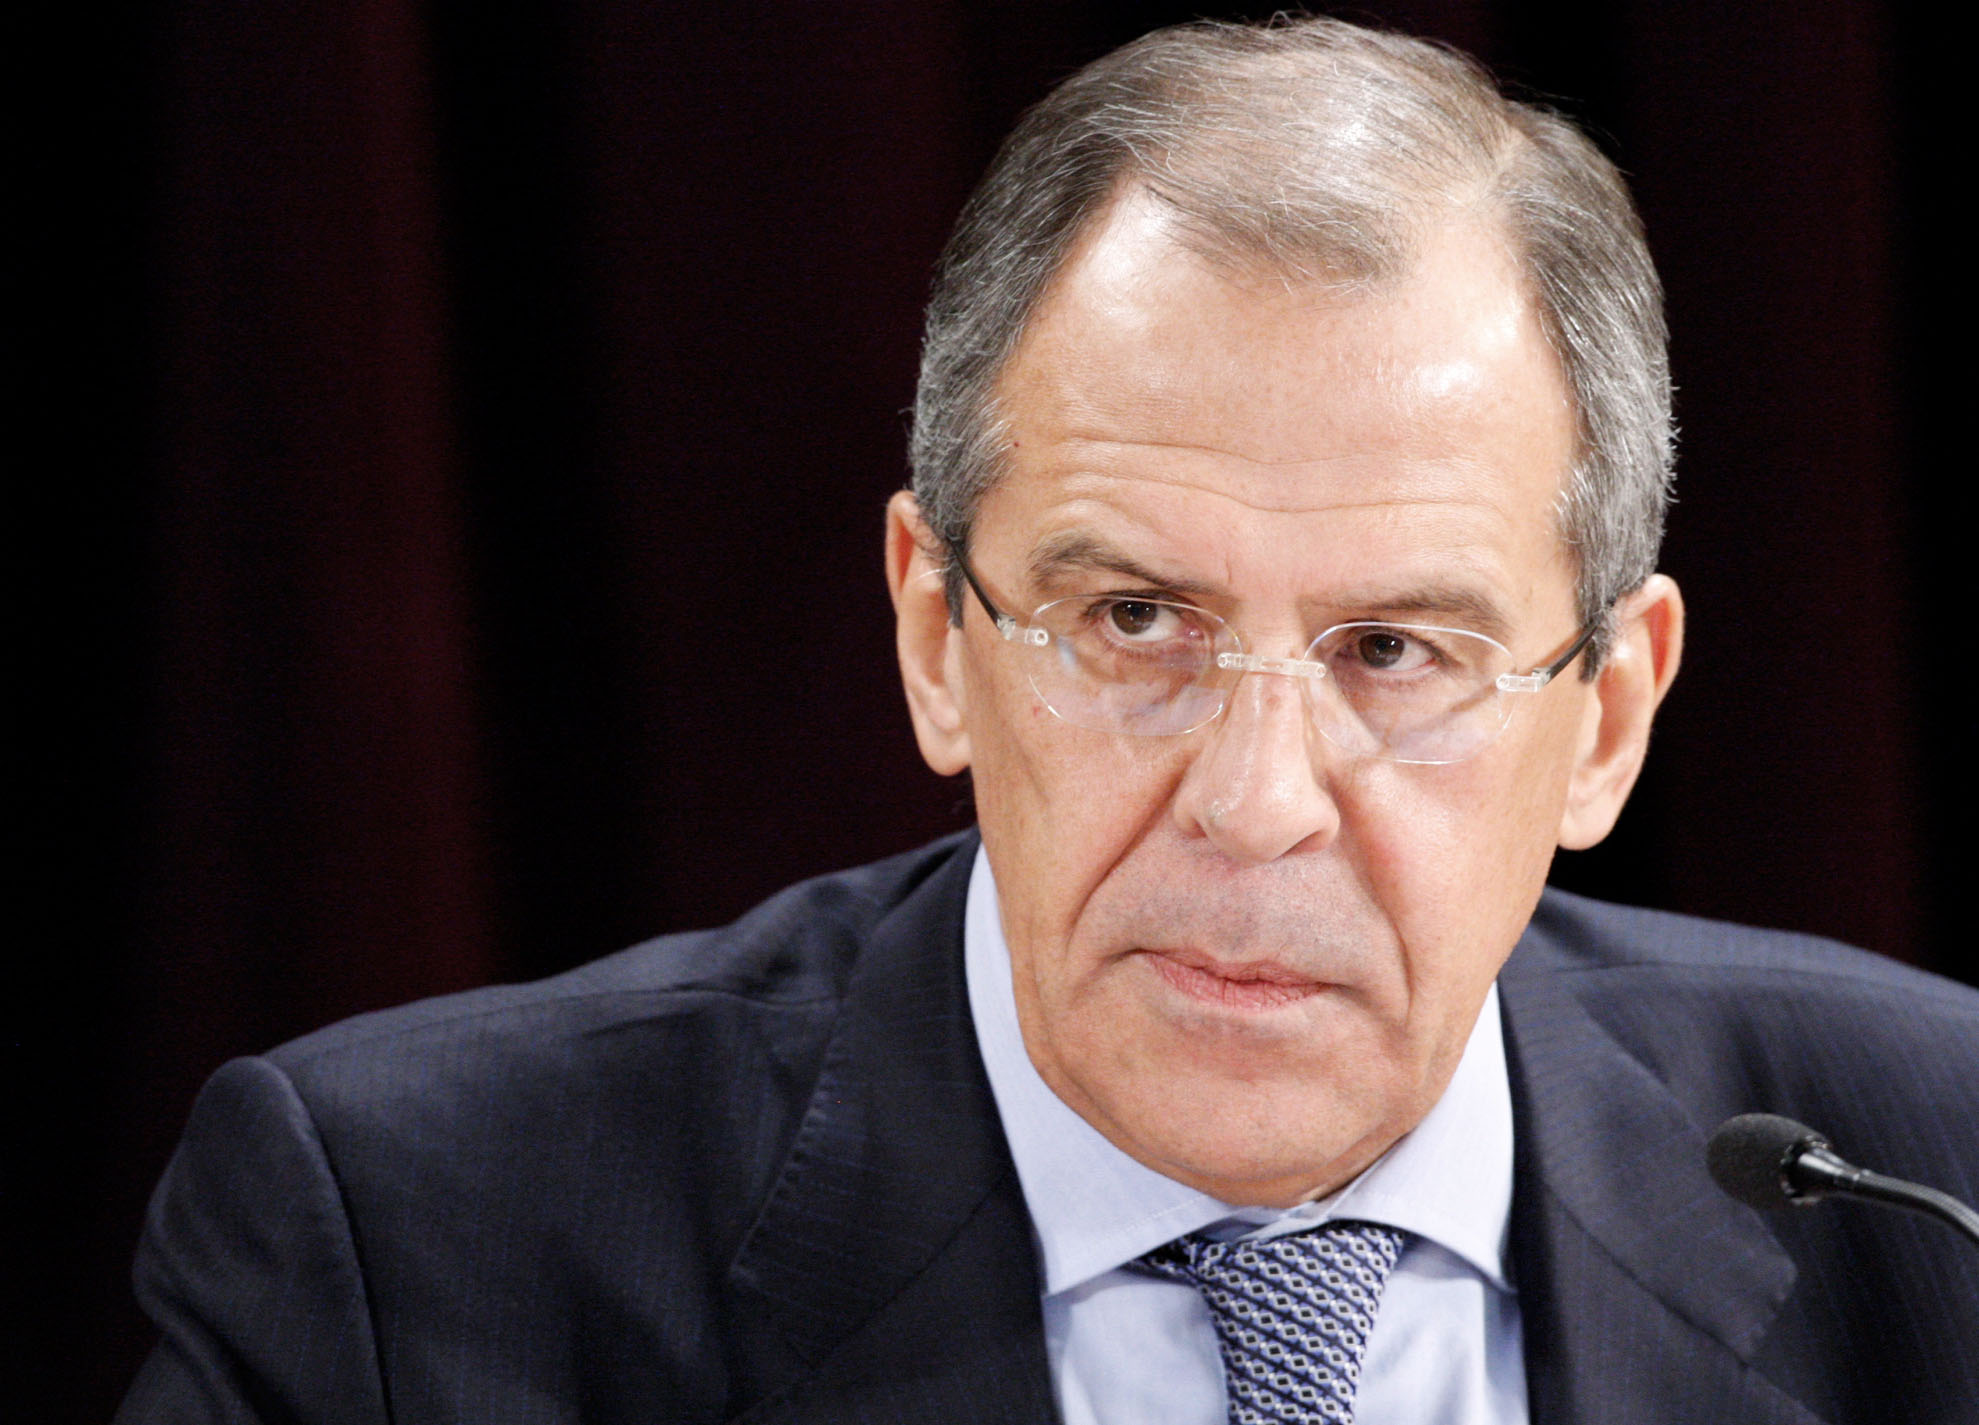 Moscow sees opportunities to break stalemate in Nagorno-Karabakh conflict